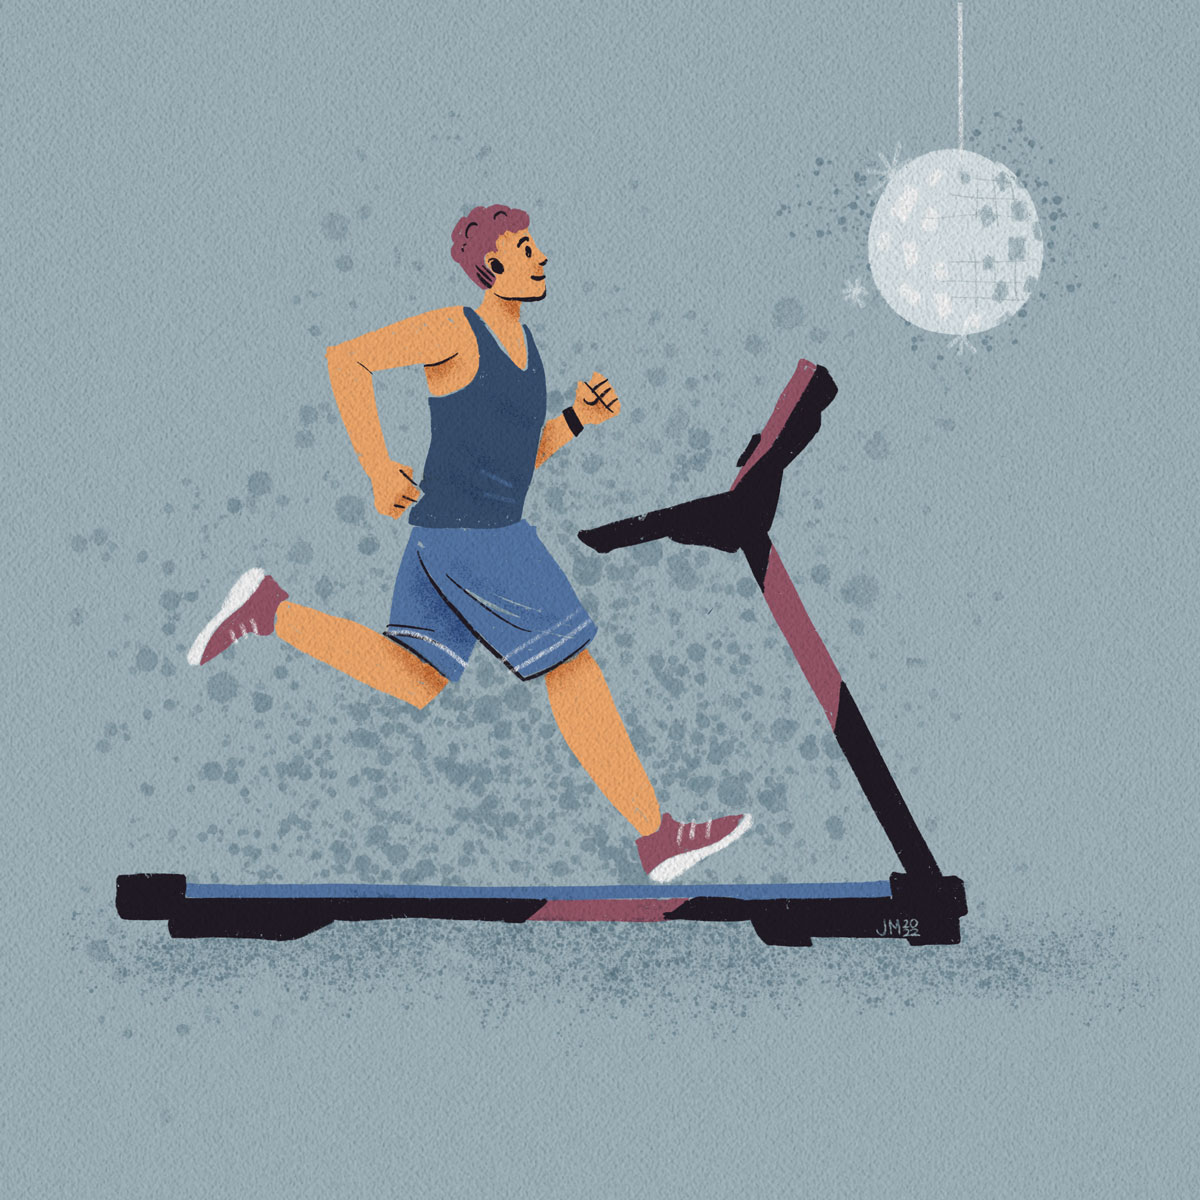 Illustration of man working out as part of New Year's resolutions